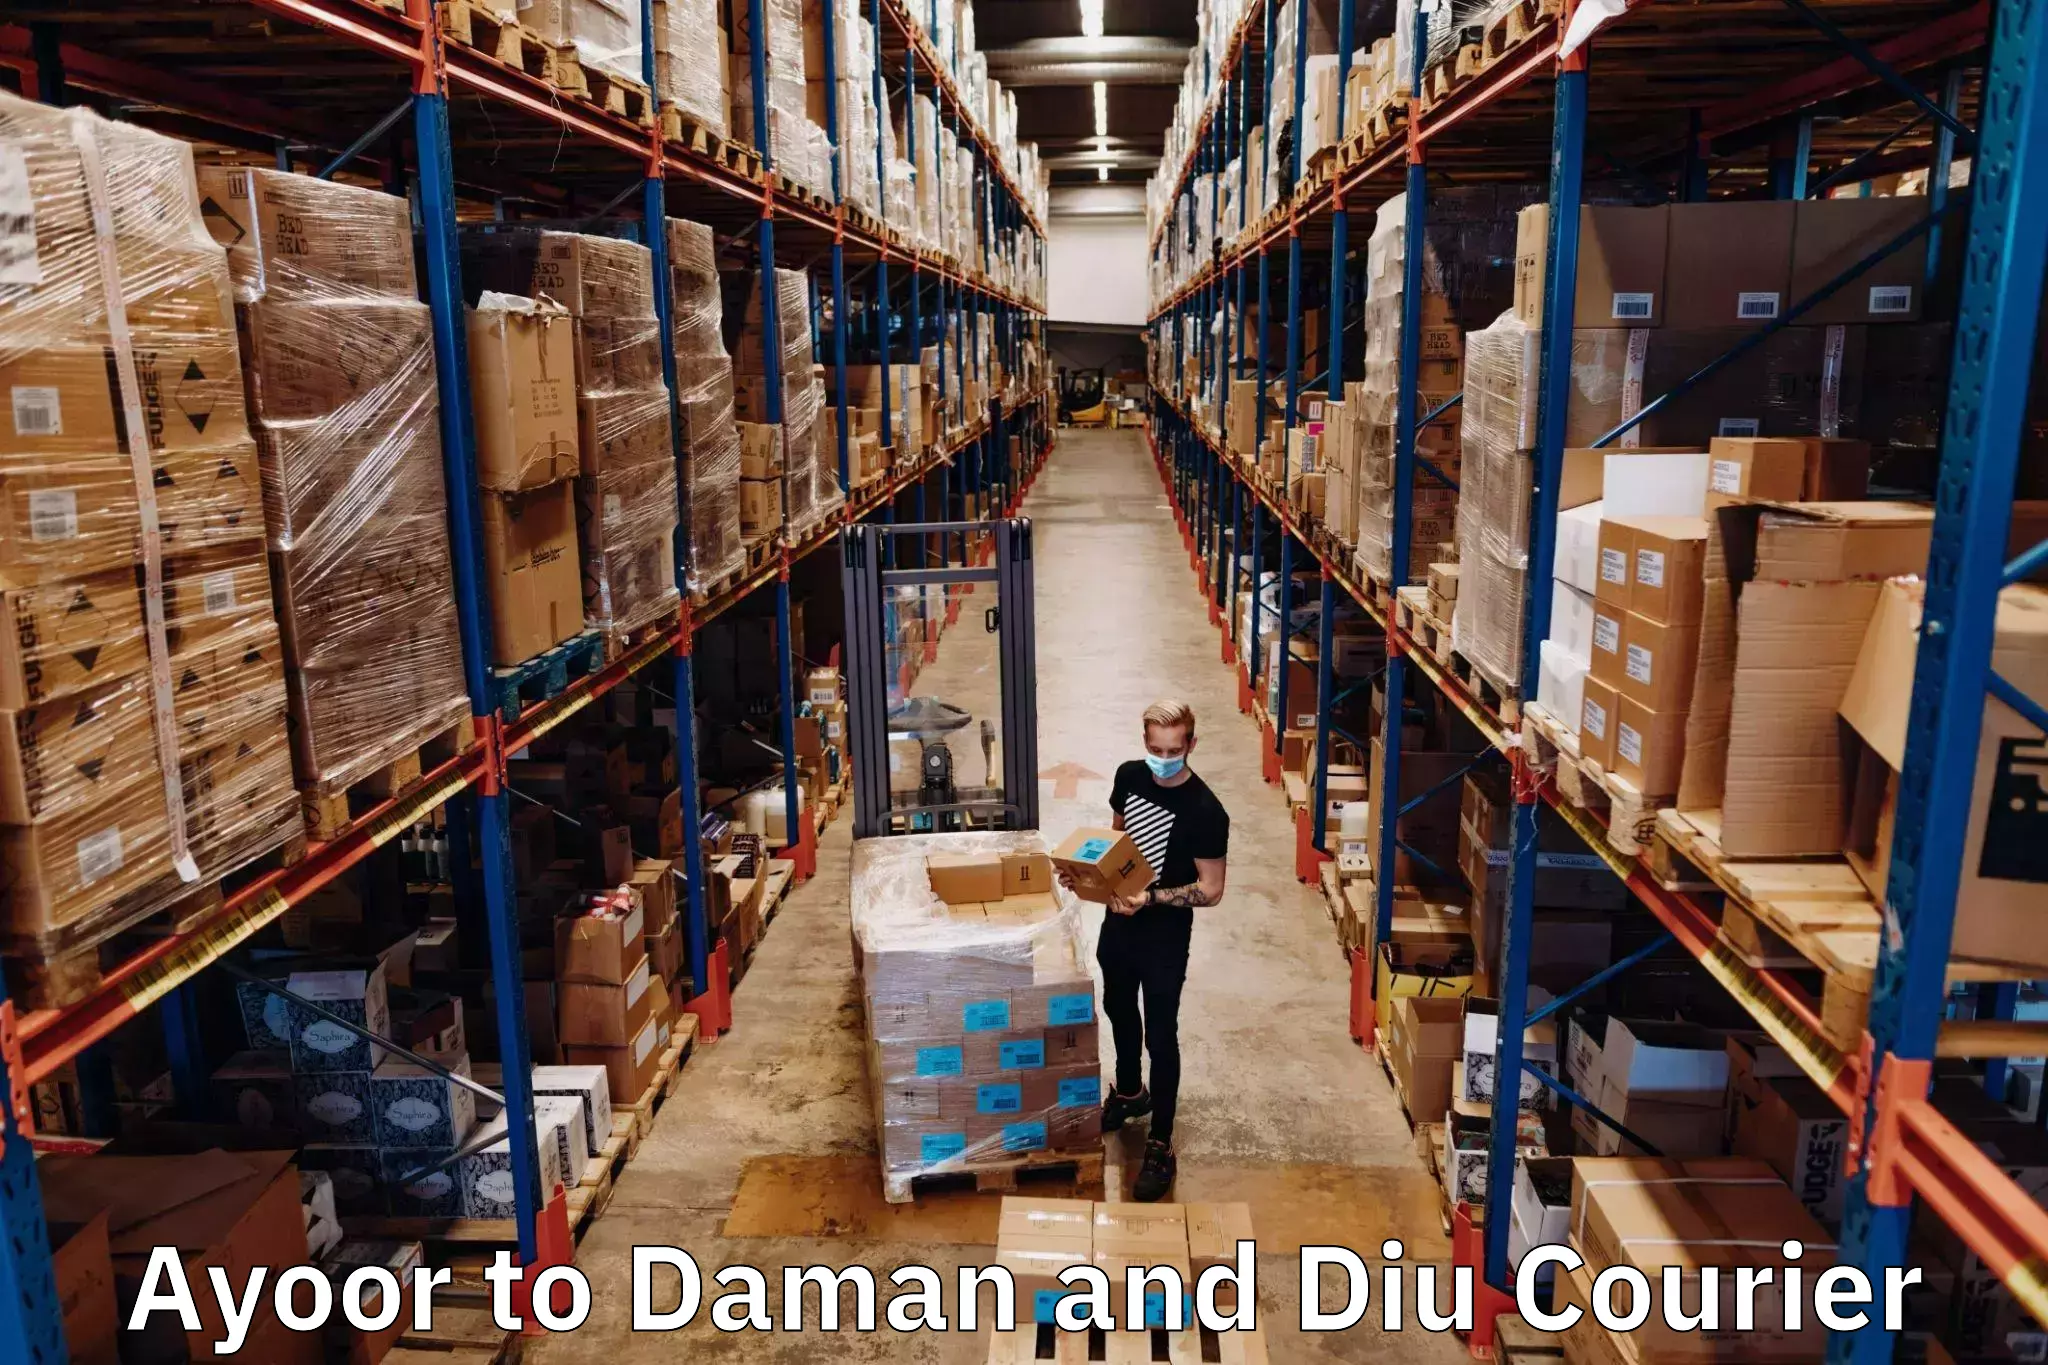 Global courier networks Ayoor to Daman